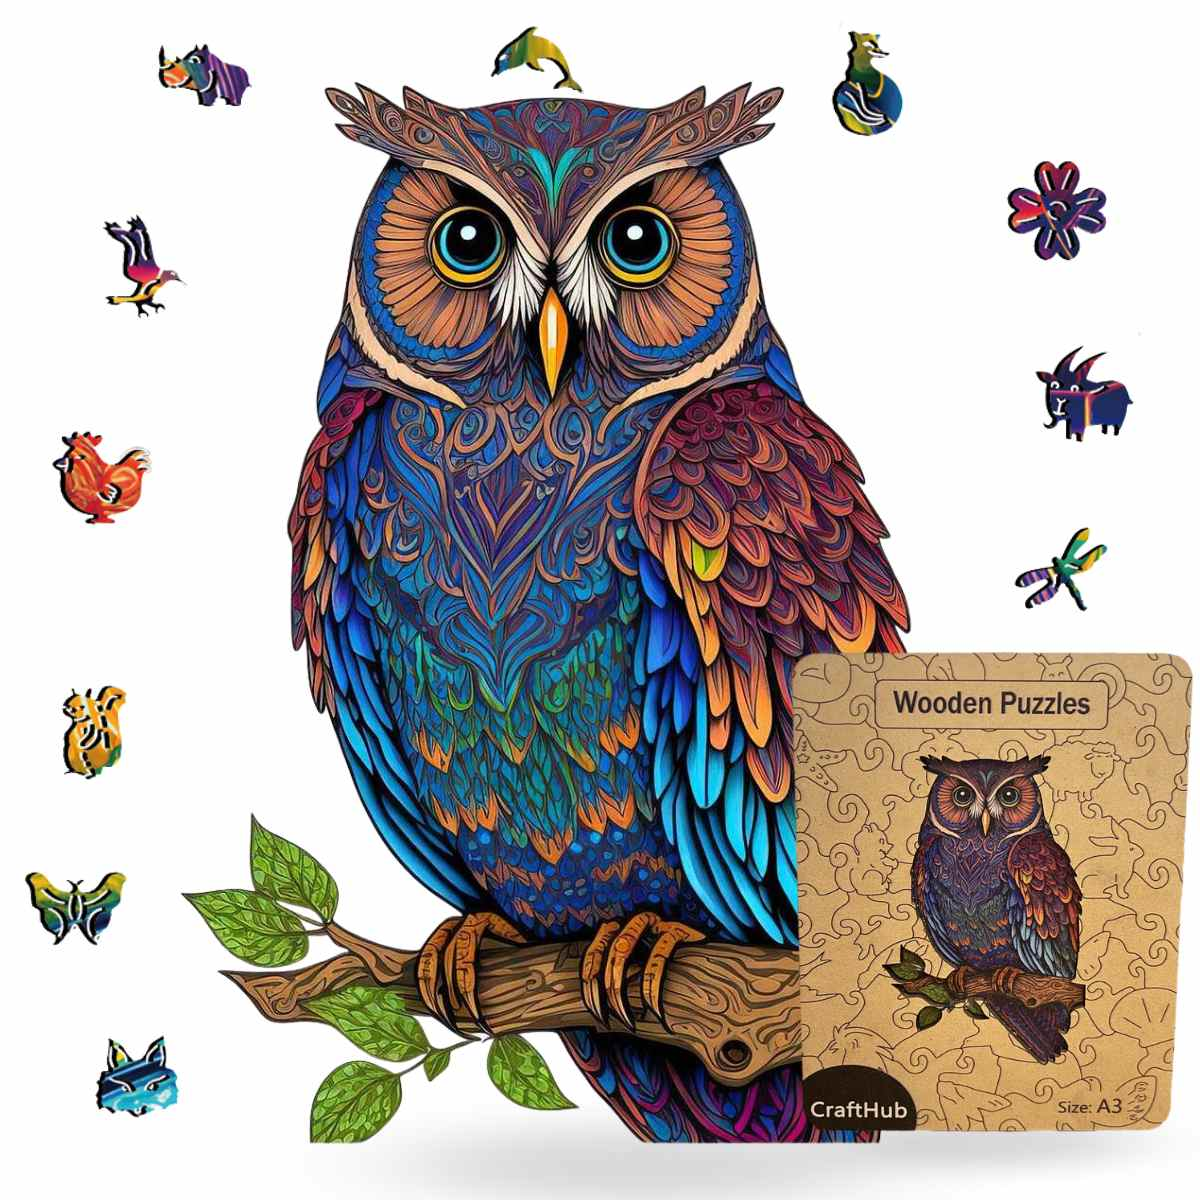 Enchanting Owl Wooden Jigsaw Puzzle - Perfect Gift 352